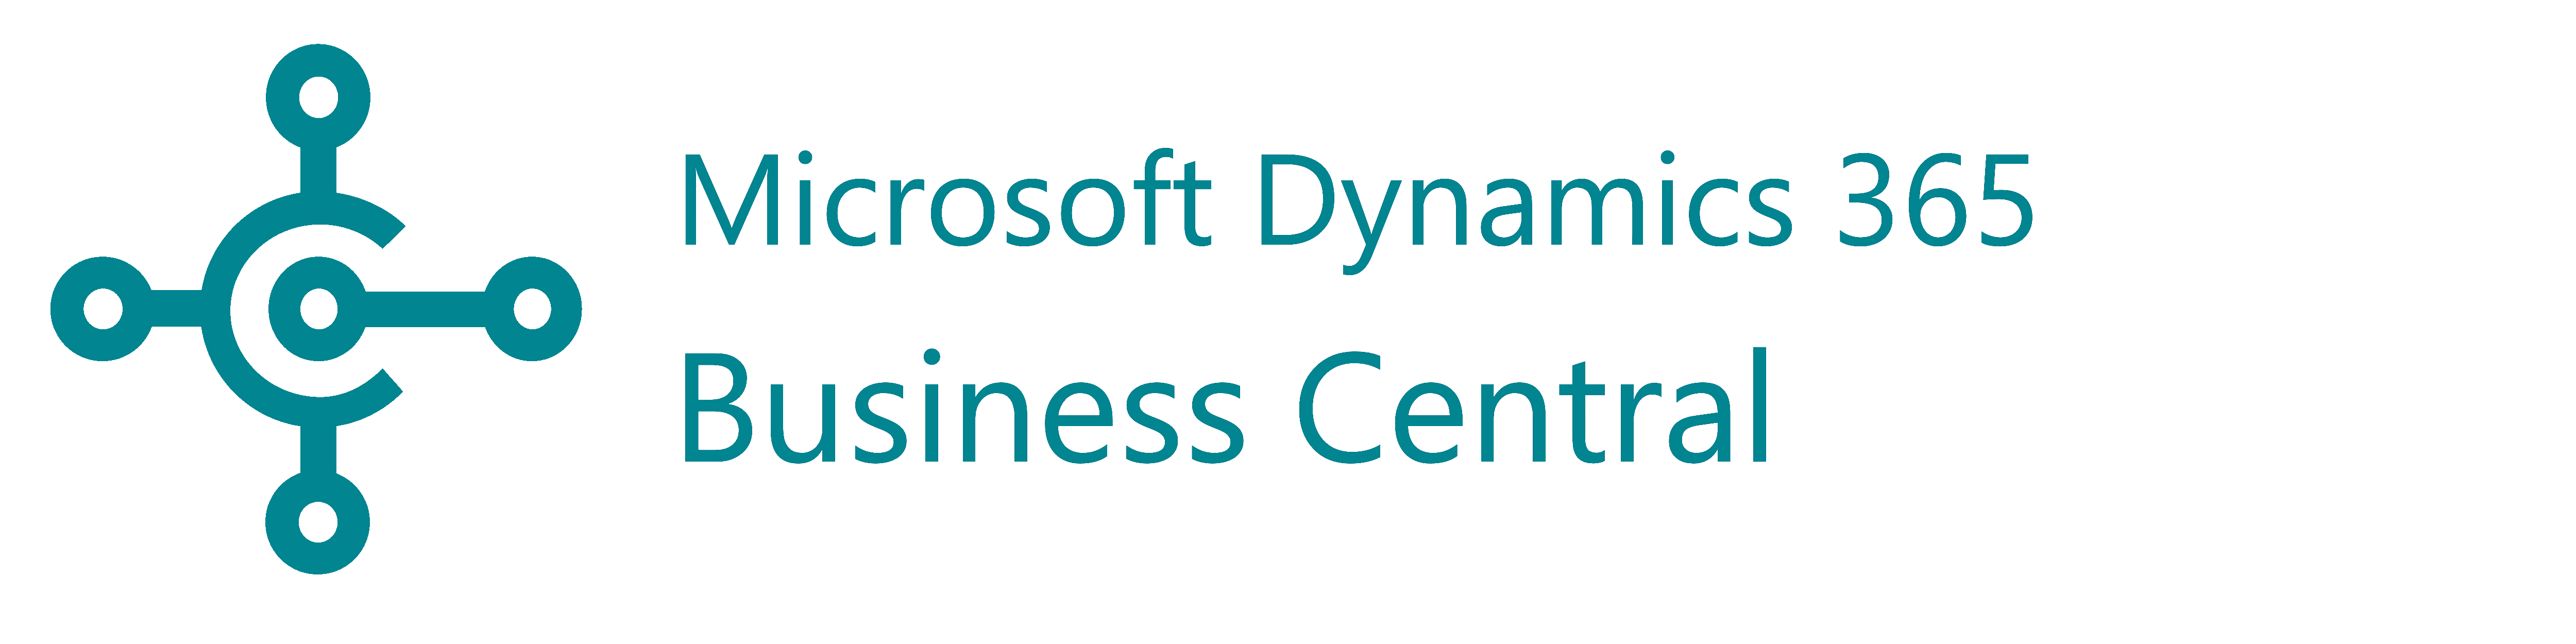 Microsoft Dynamics 365 Business Central - Datali Group